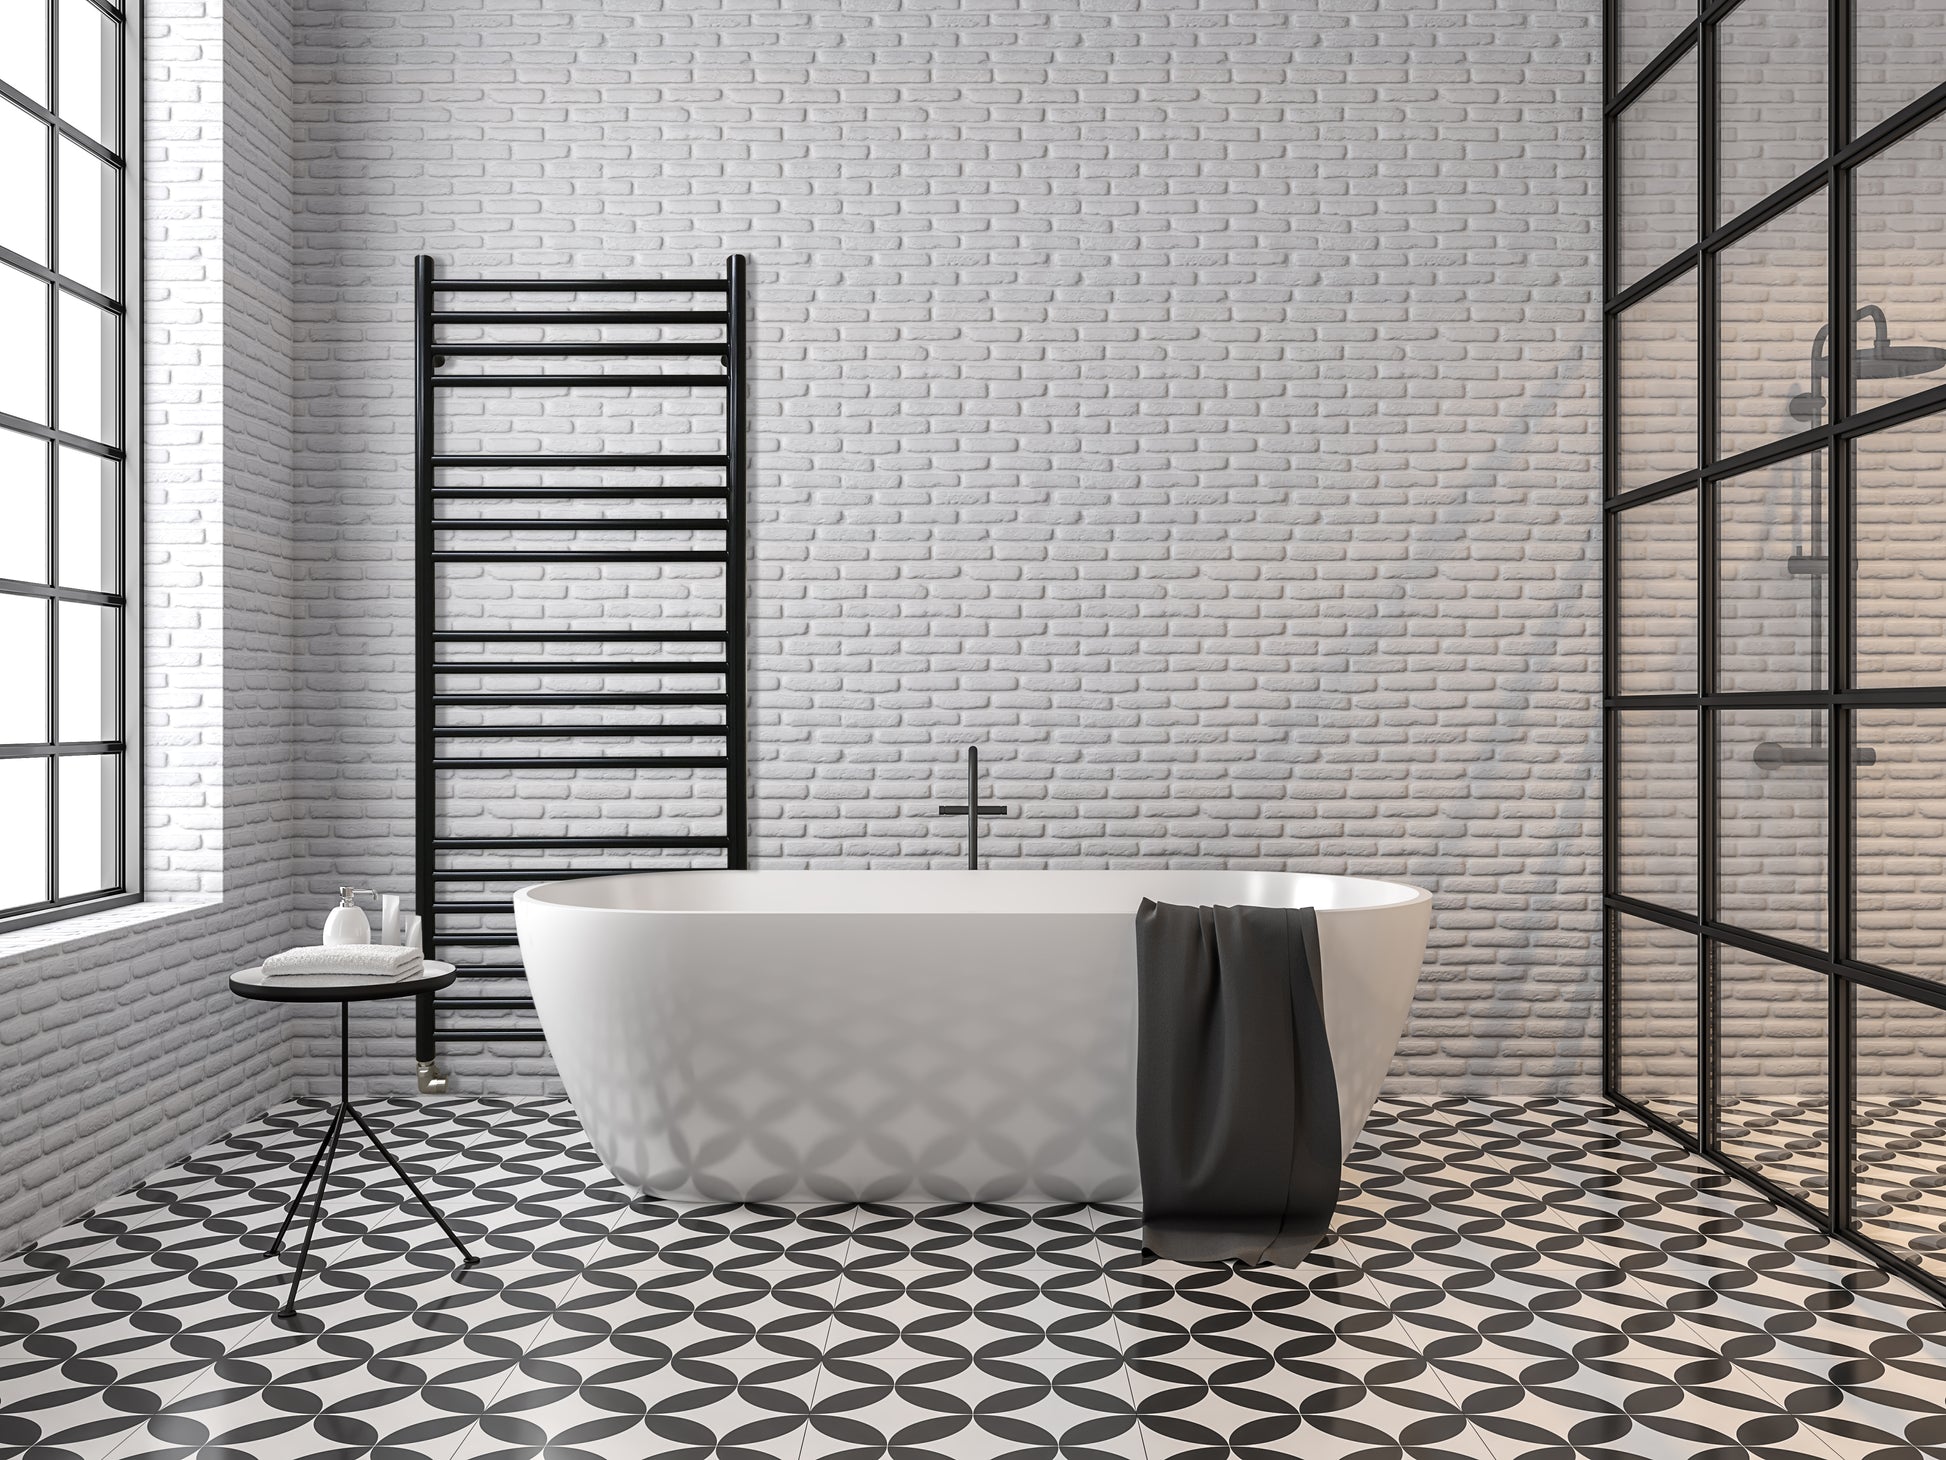 Couth & Co. design packages option 3 bathroom designs